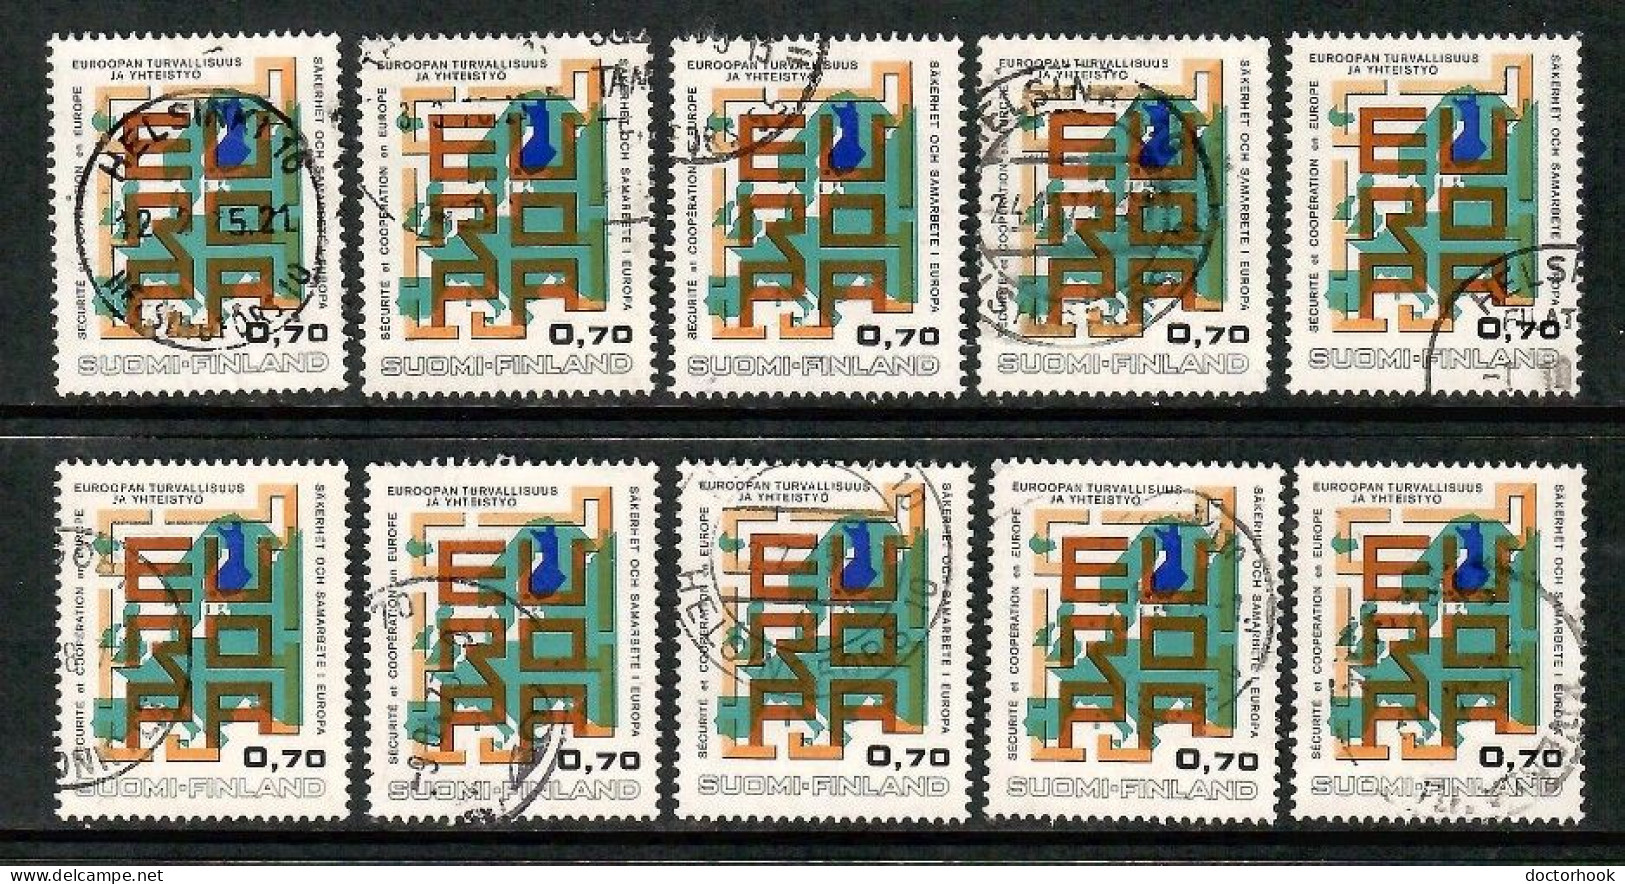 FINLAND   Scott # 529 USED WHOLESALE LOT OF 10 (CONDITION AS PER SCAN) (WH-620) - Verzamelingen